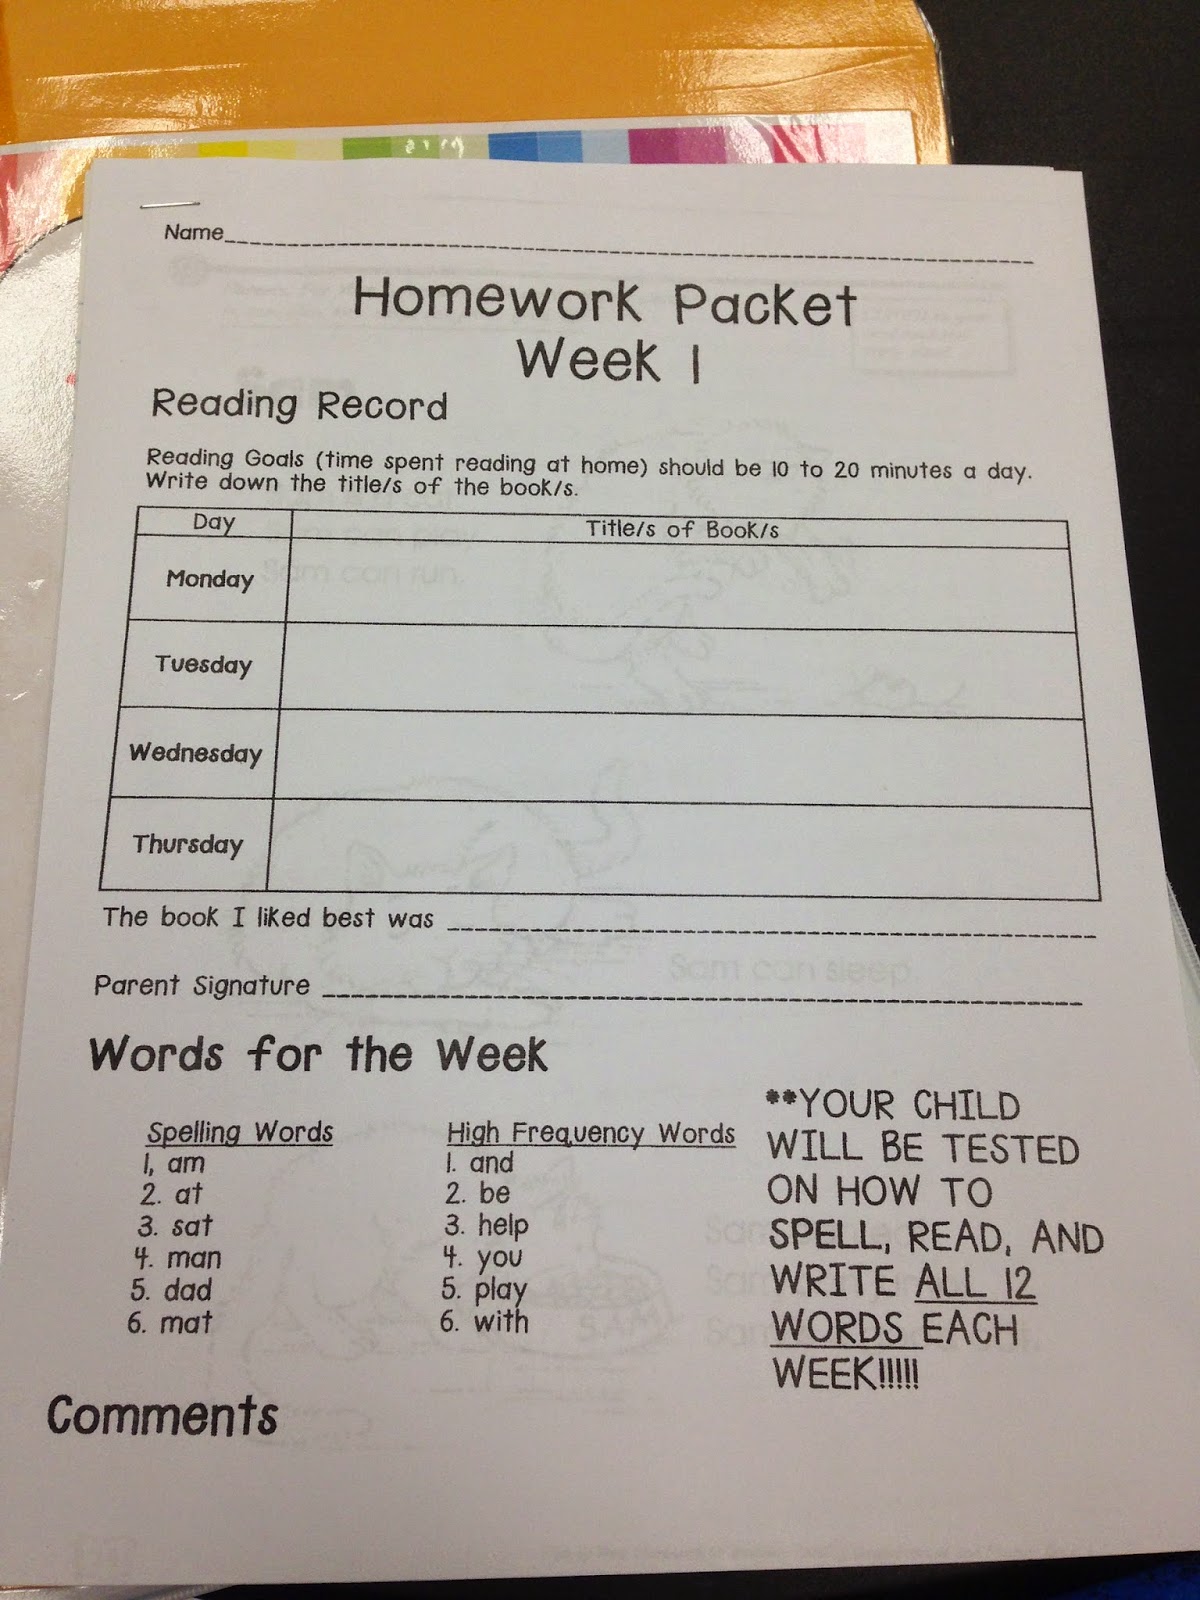 homework packet answers